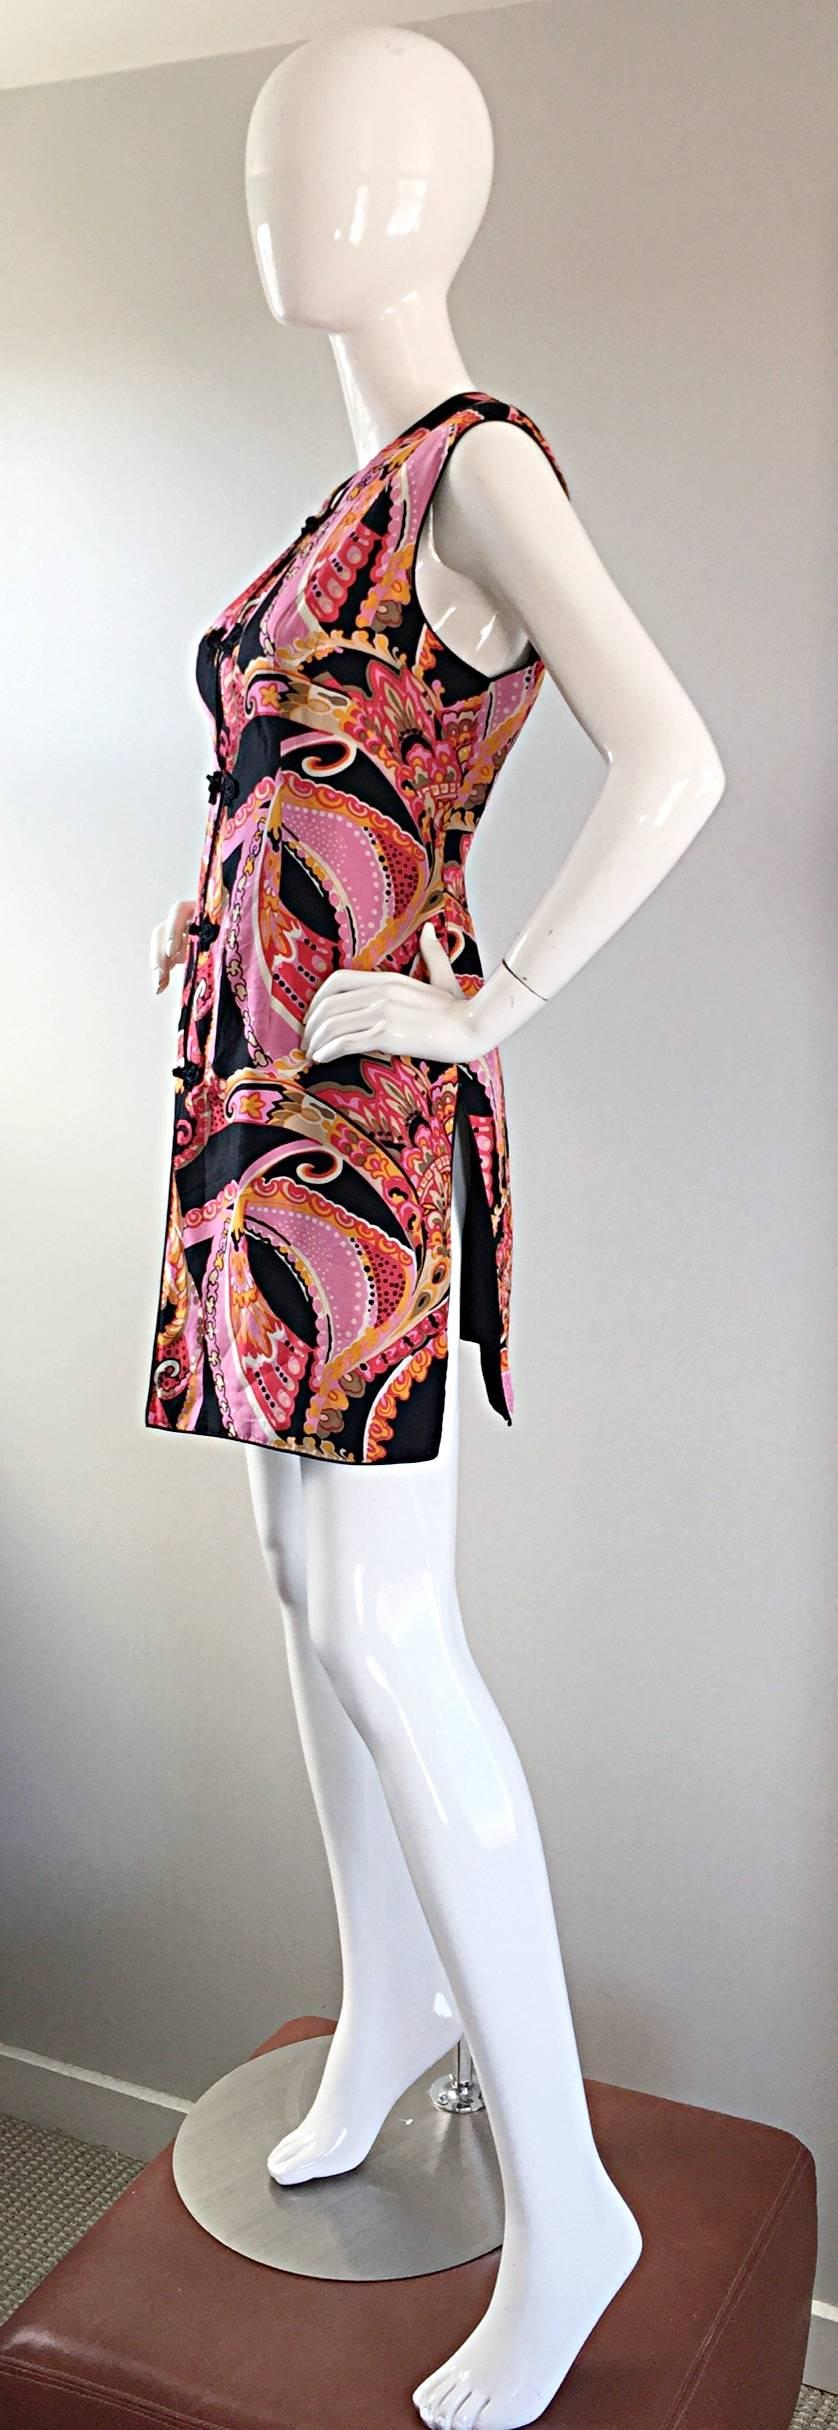 1960s 60s Psychedelic Asian Themed Colorful Mod Long Silk Vest or Mini Dress  2